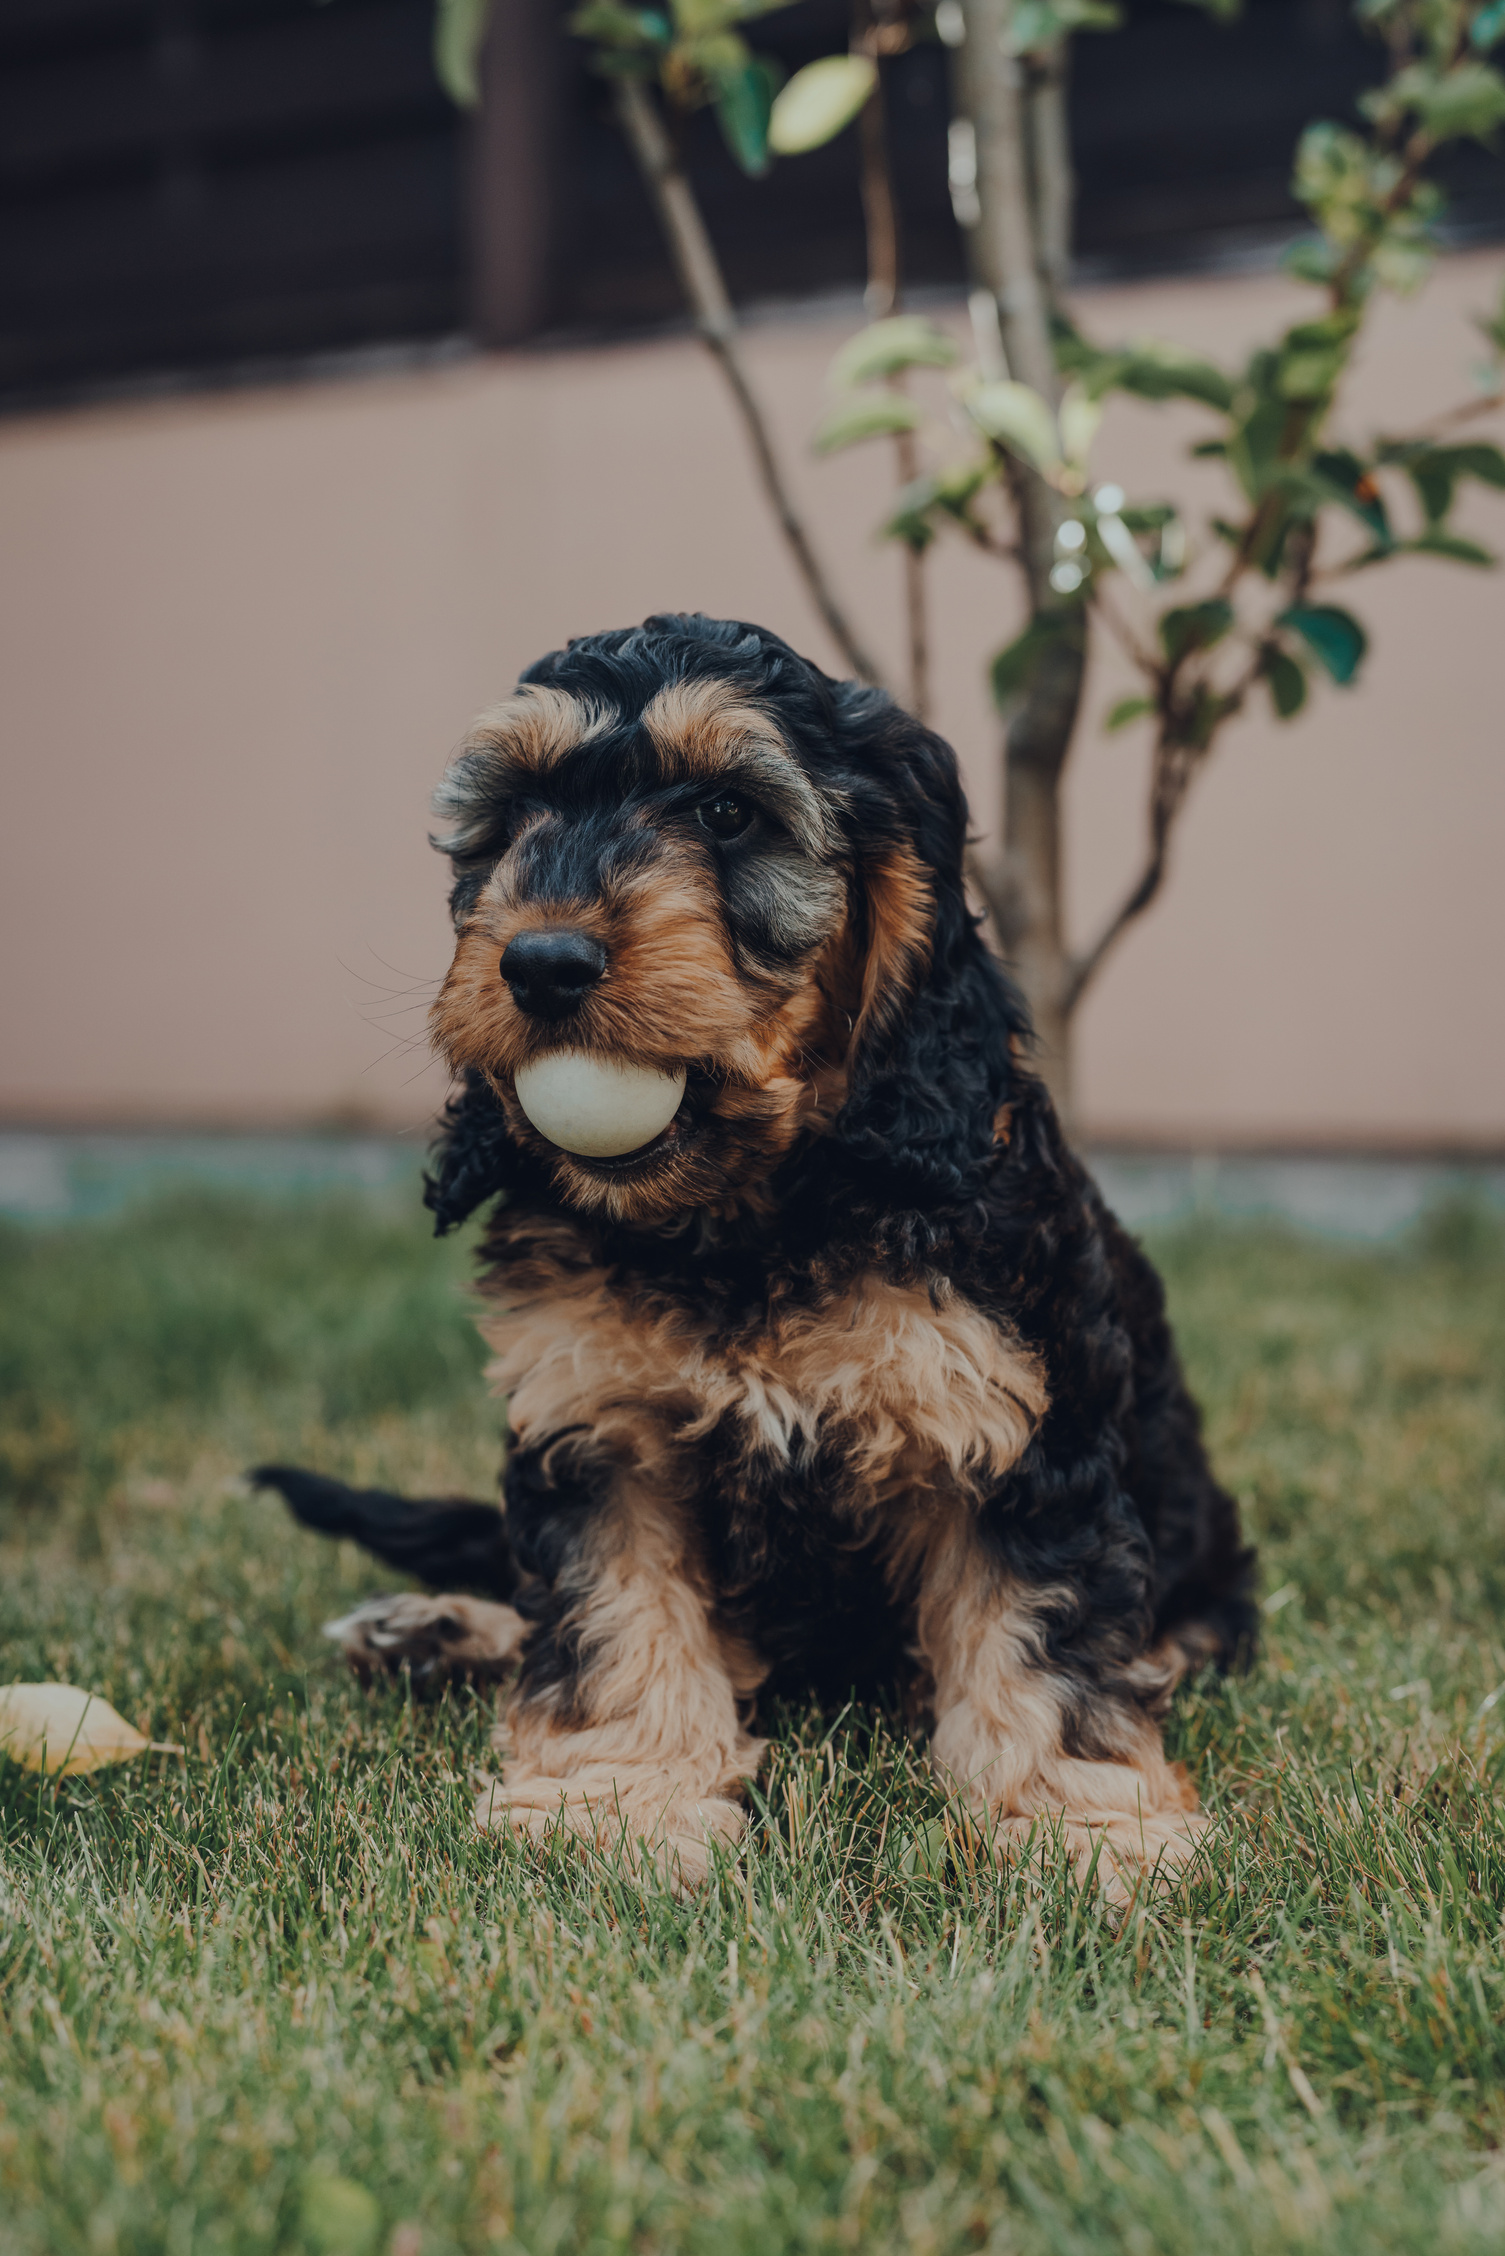 Cute Cockapoo Puppy Sitting in the Garden With a Ball in His Mouth